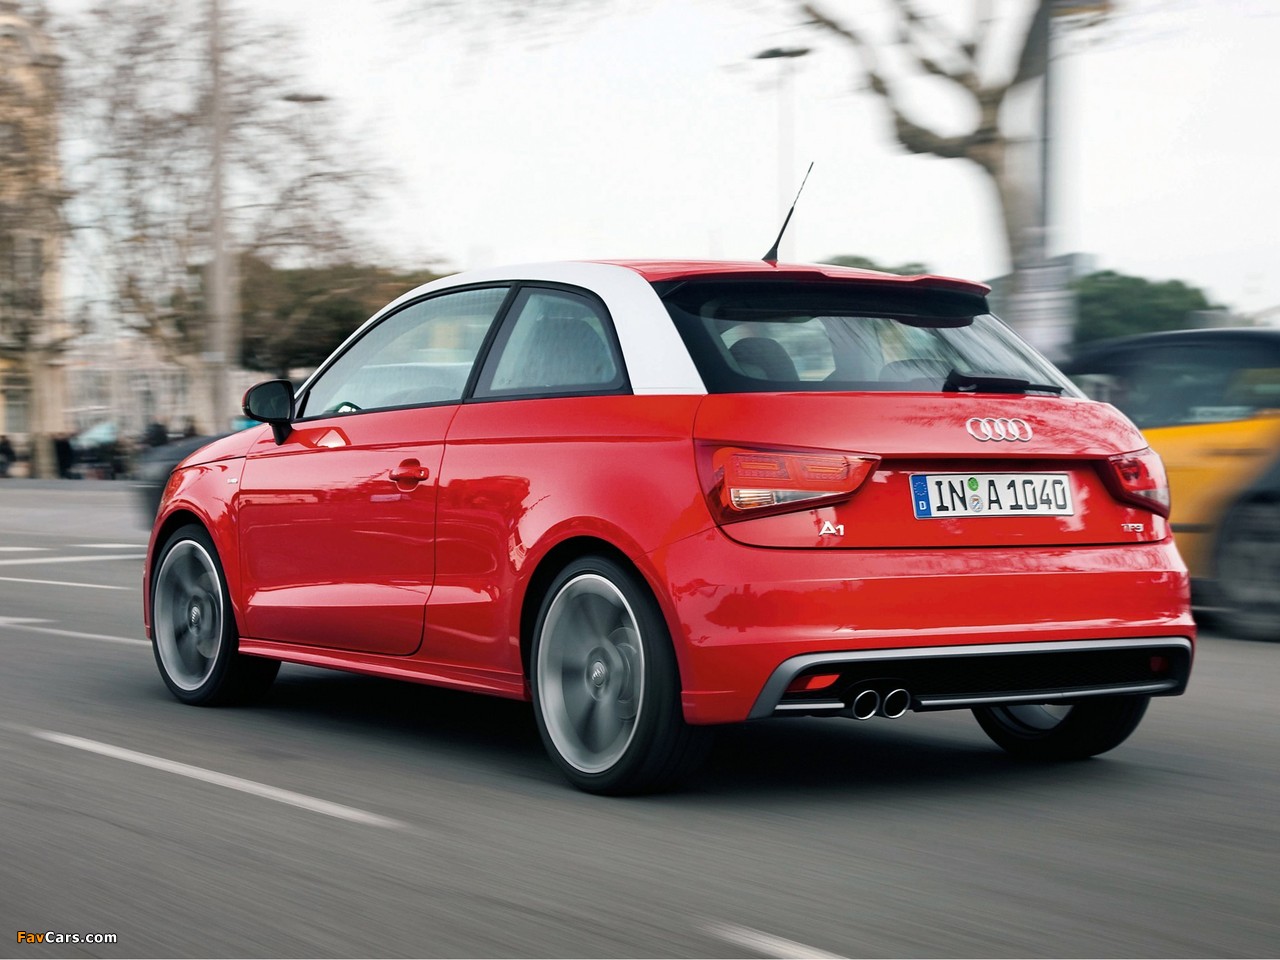 Audi A1 TFSI S-Line 8X (2010) pictures (1280 x 960)